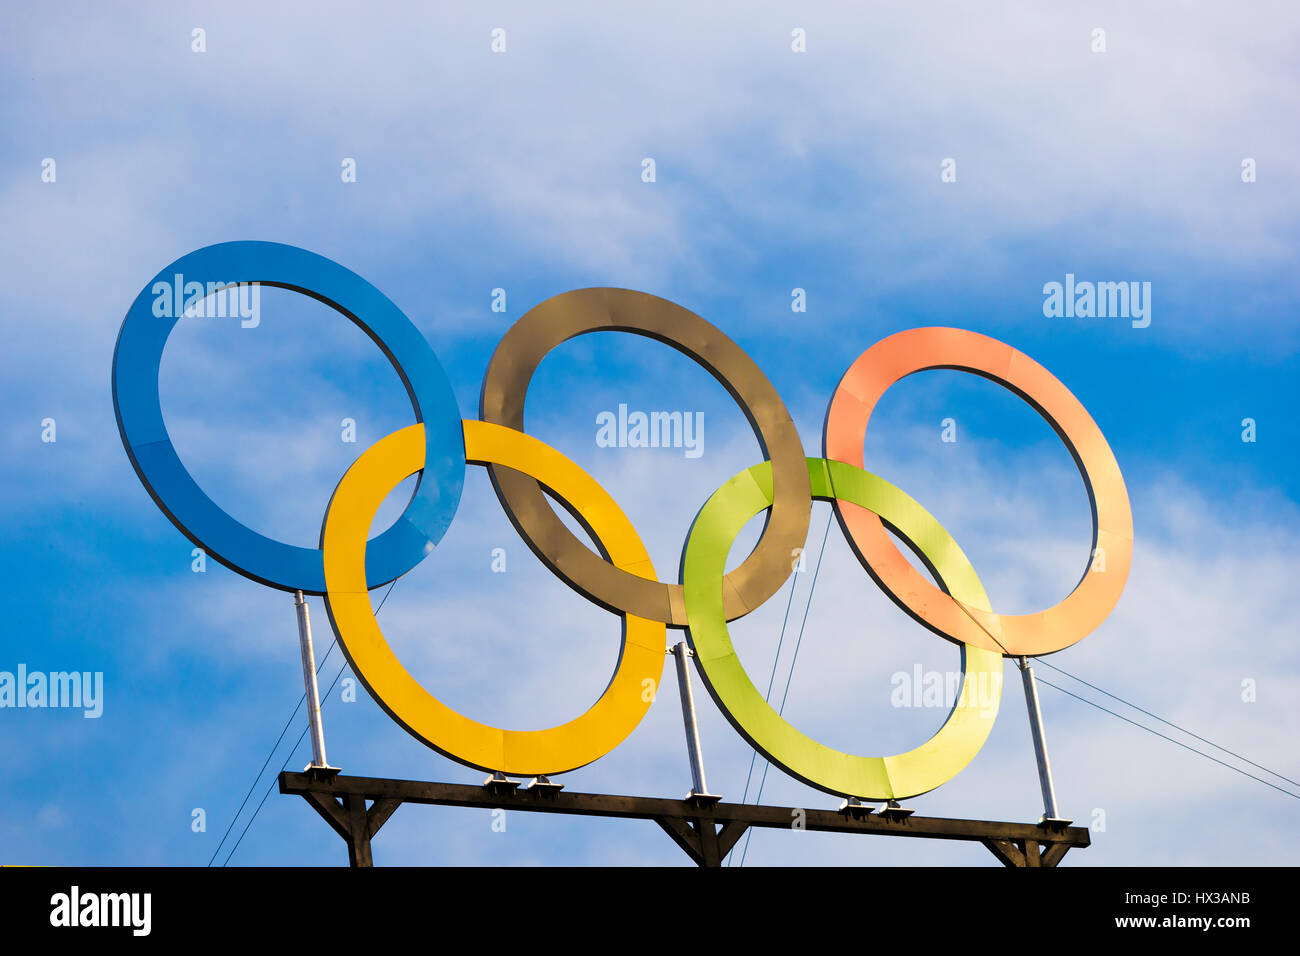 Rio de Janeiro, Brazil. 15 August 2016 Olympic Rings at the Beach Volleyball venue for the 2016 Olympic Summer Games. ©Paul J. Sutton/PCN Photography. Stock Photo